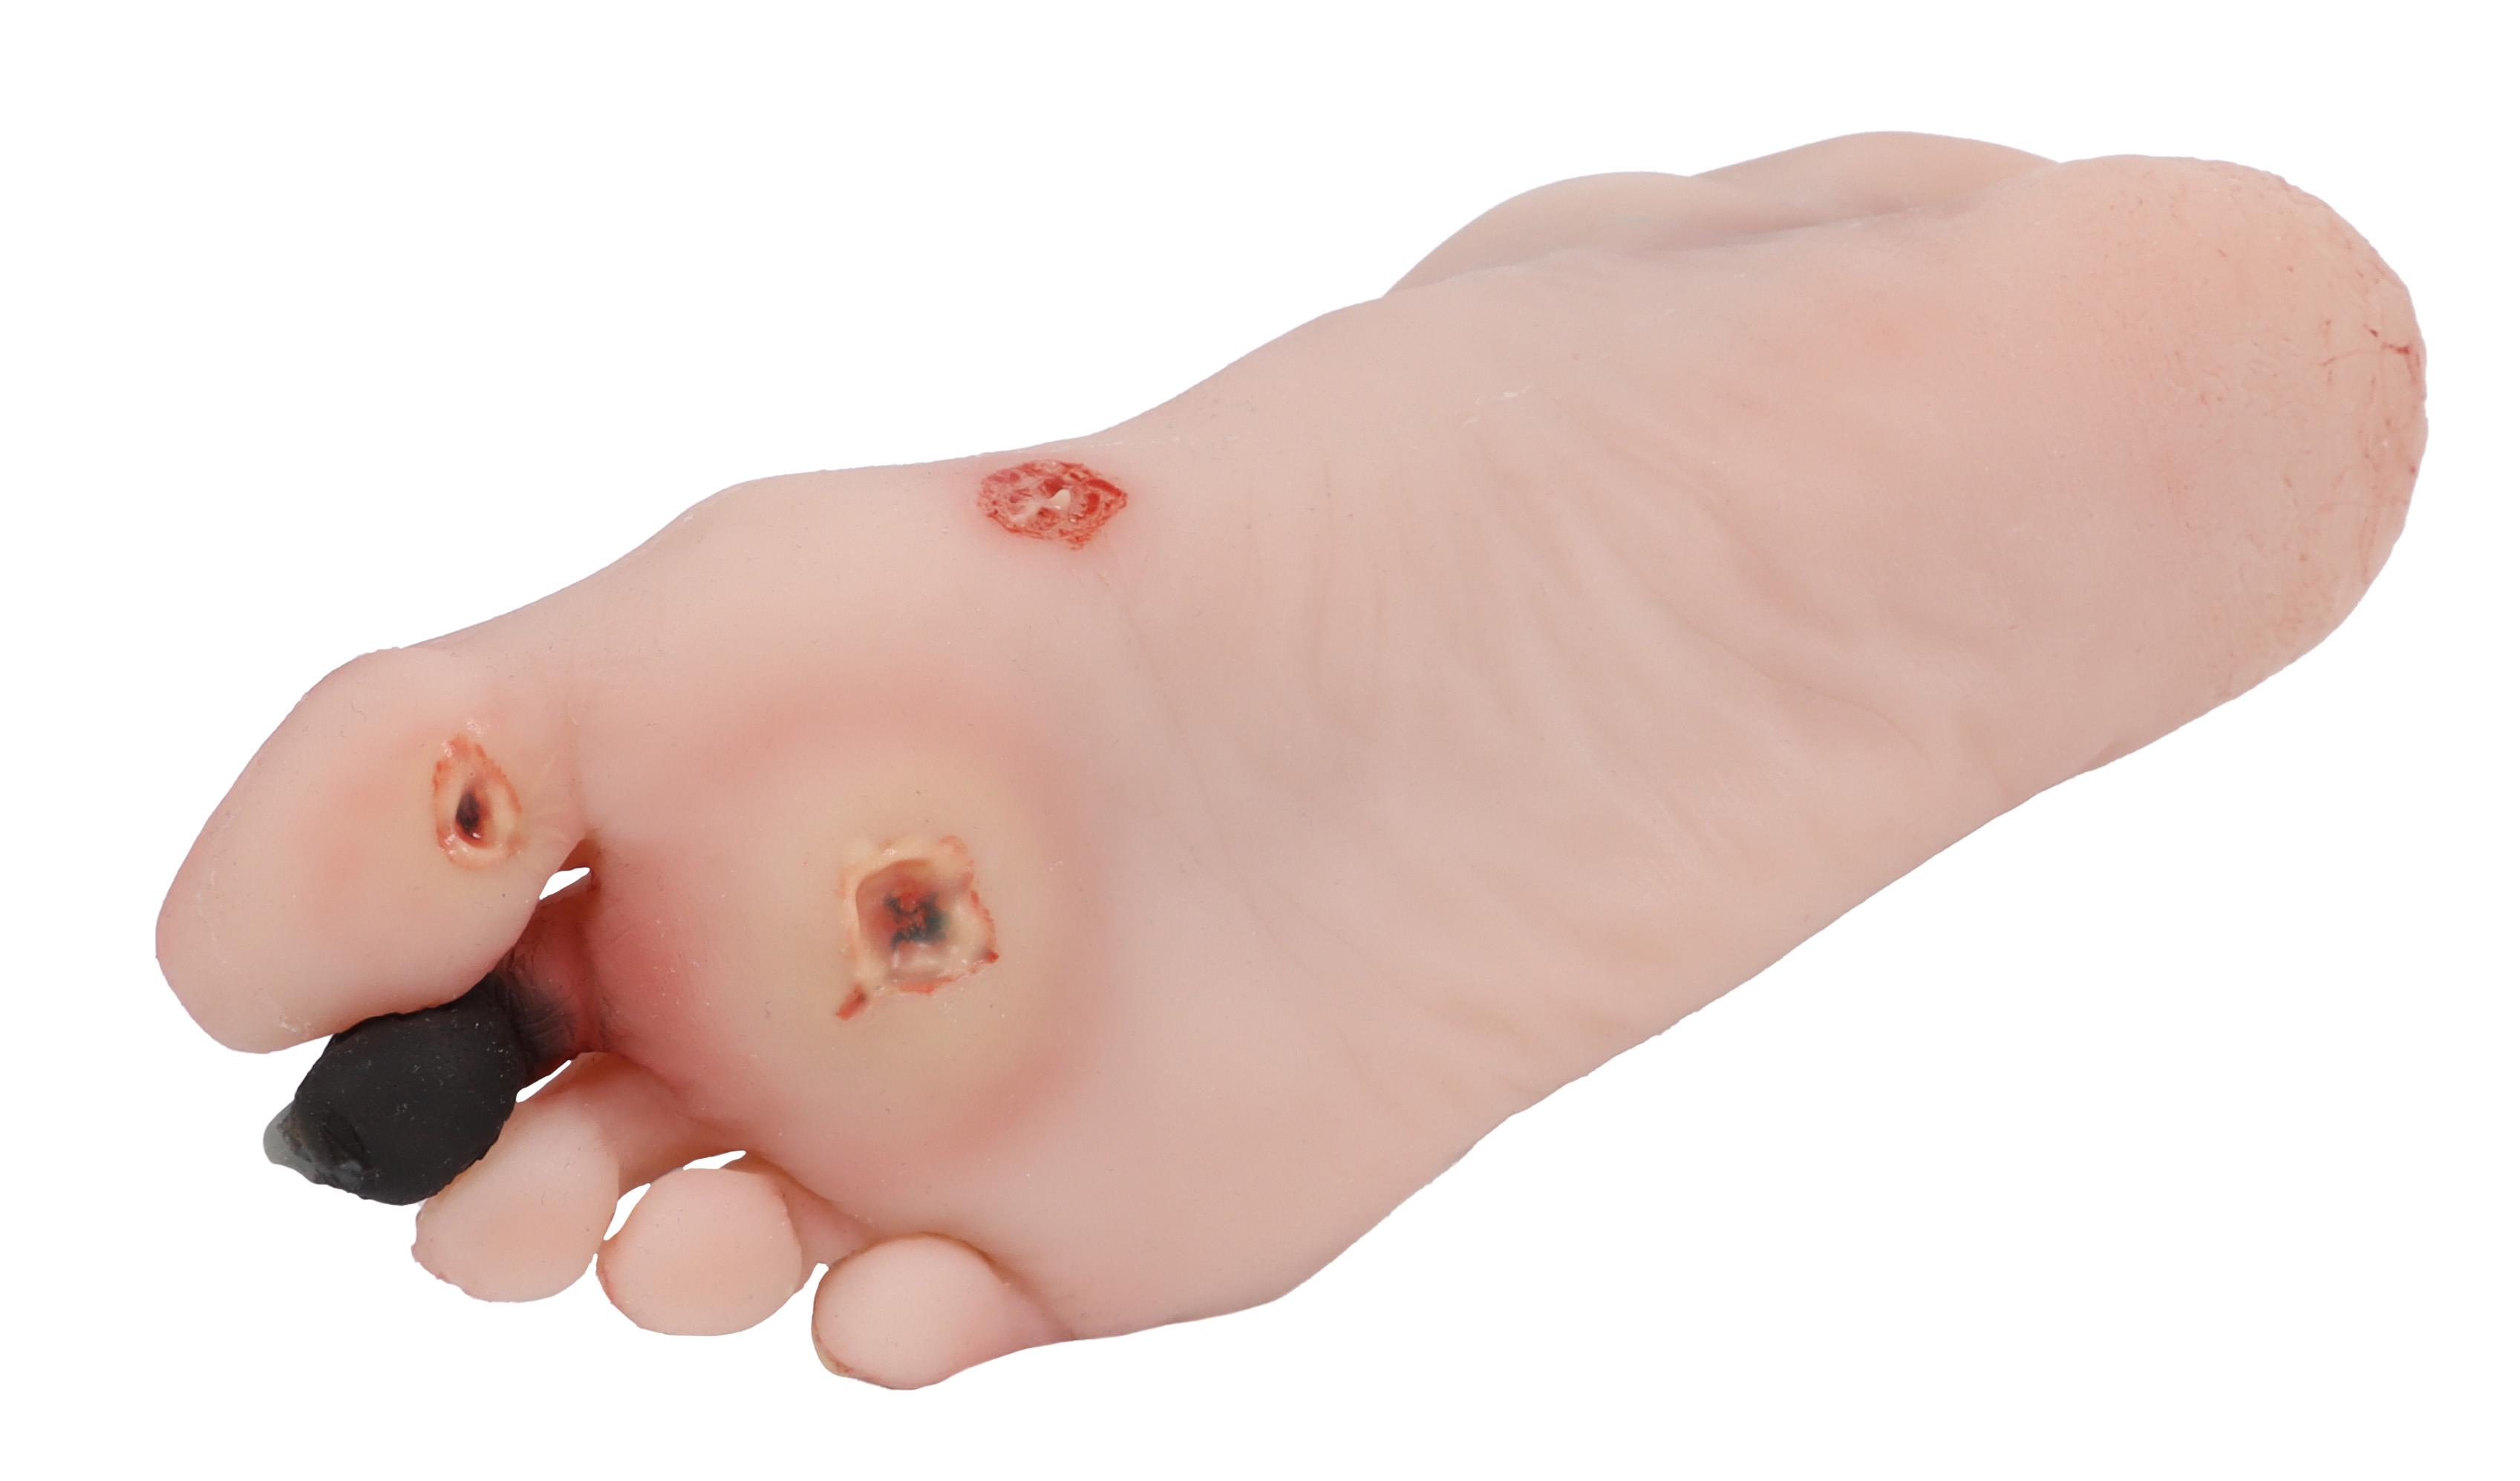 Wound-foot-with-diabetic-foot-syndrome-manikin-version-4